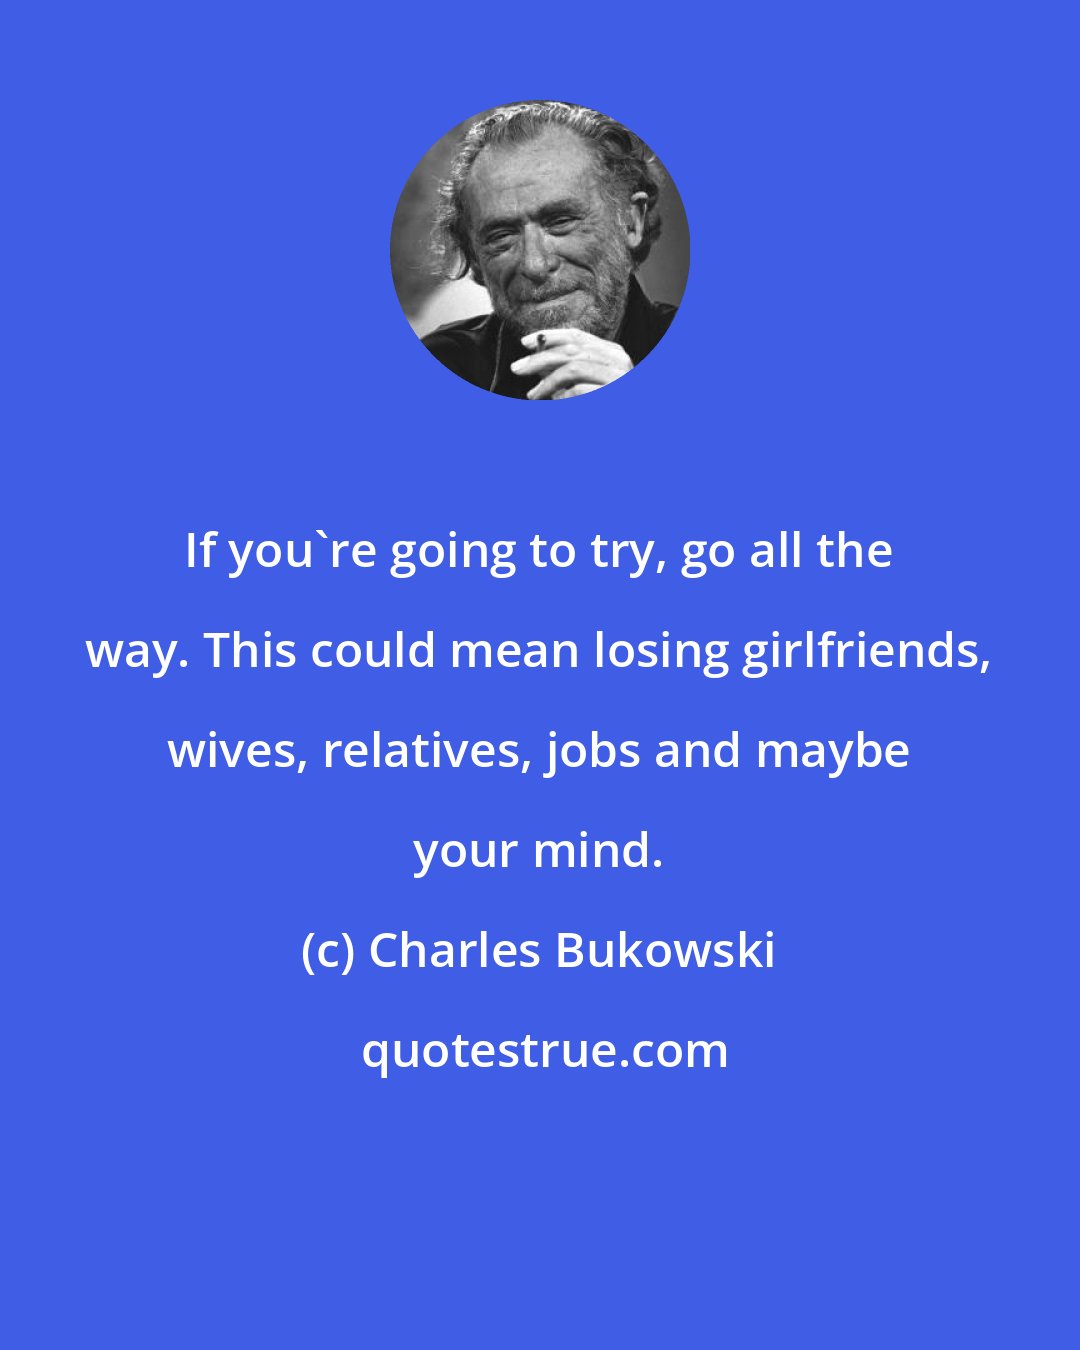 Charles Bukowski: If you're going to try, go all the way. This could mean losing girlfriends, wives, relatives, jobs and maybe your mind.